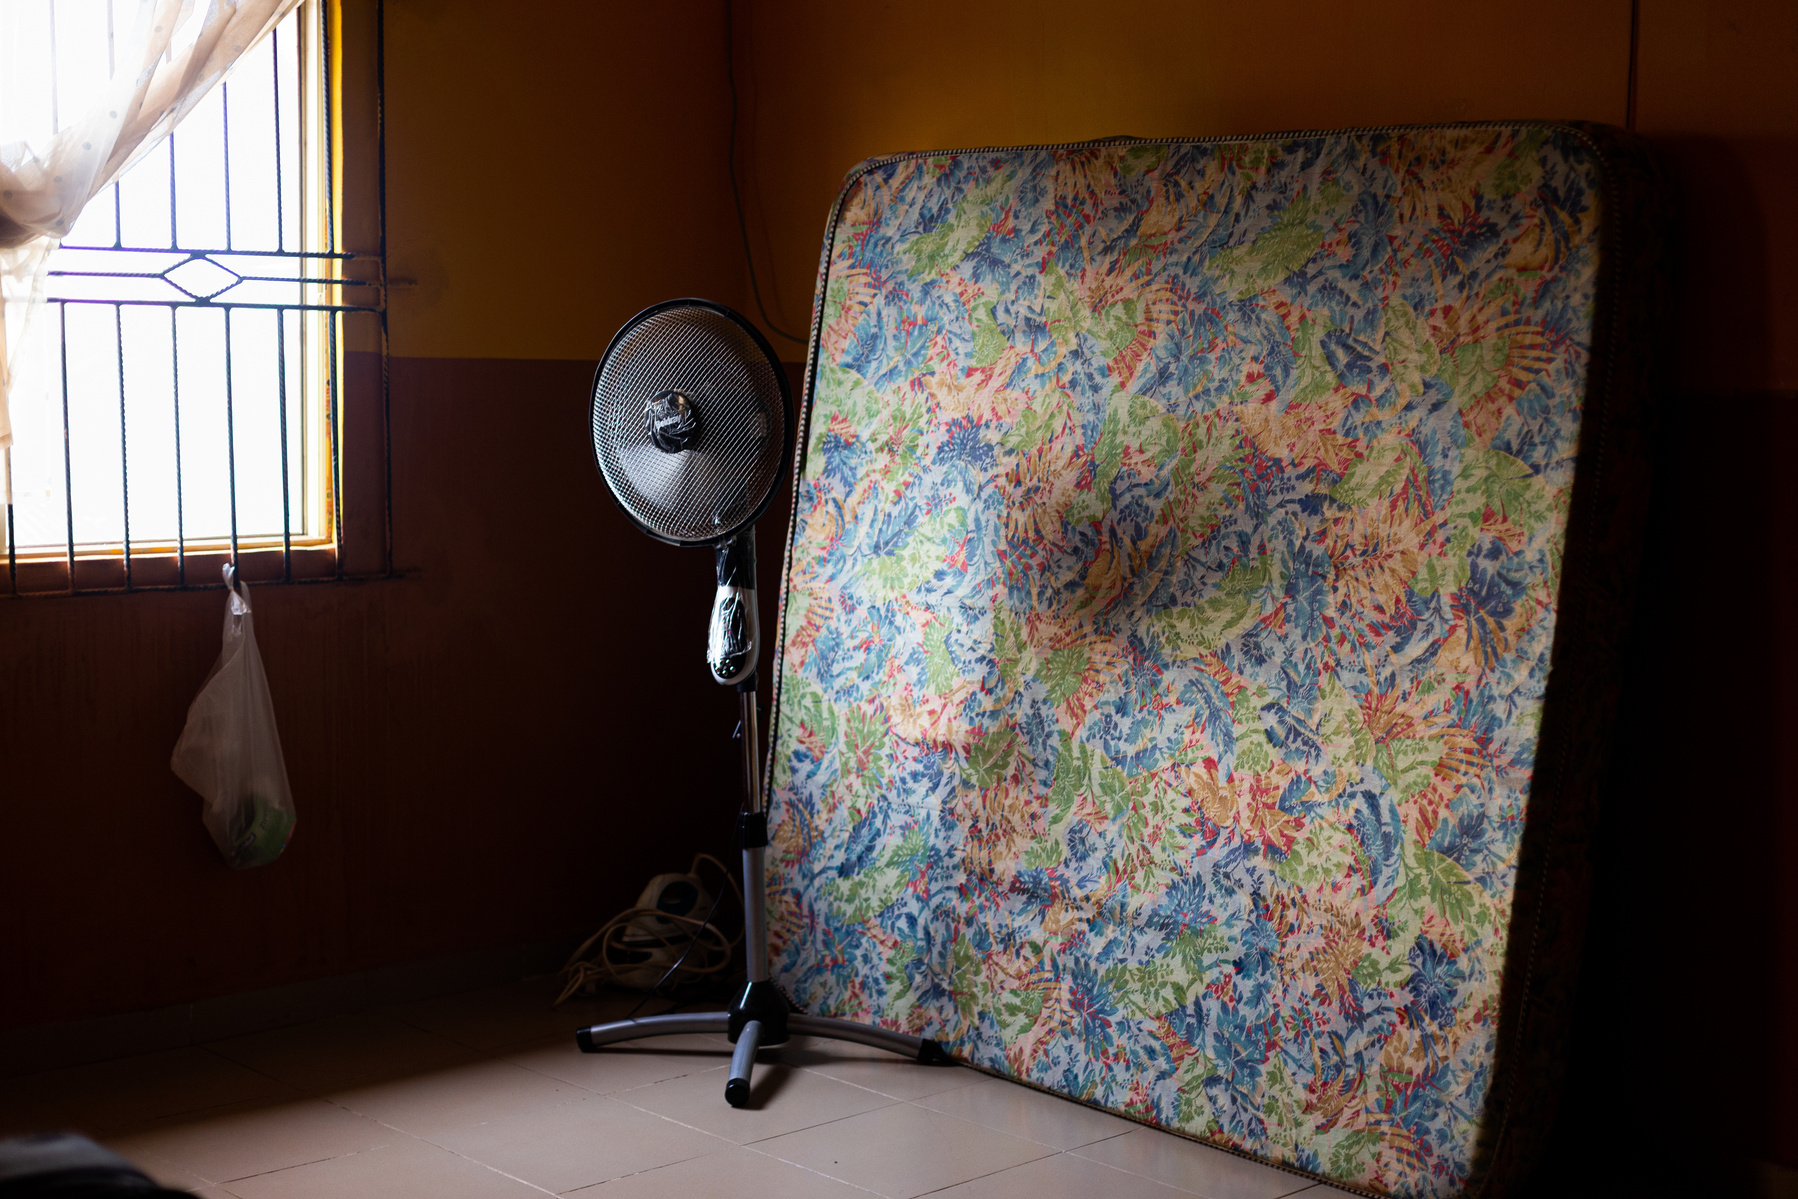 The corner of a bedroom - on the left, a window covered in iron bars, and a net curtain pulled to one side; on the right, a floral double mattress stands against the wall.  A standing fan is set in front of the mattress, it is not switched on.